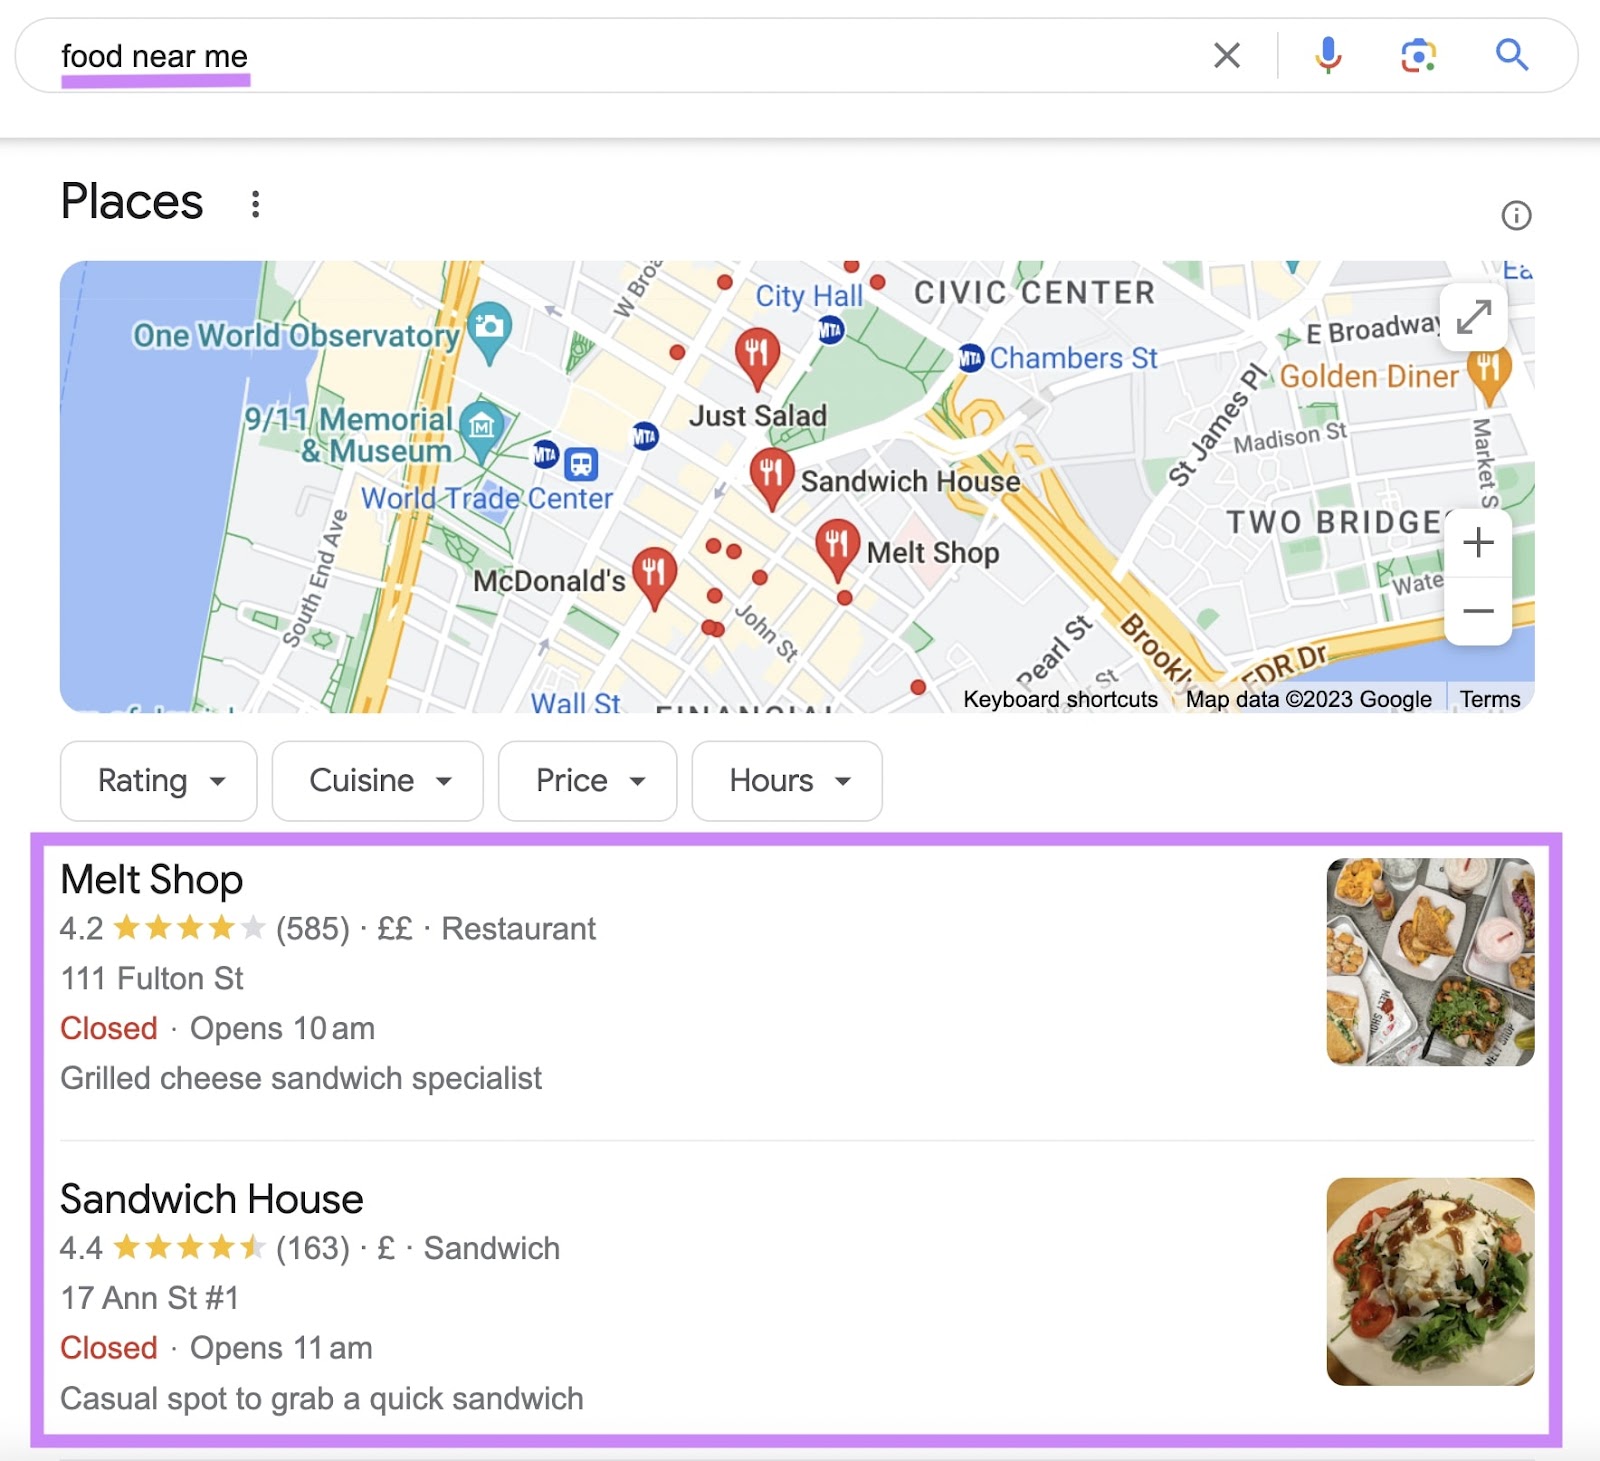 Local listings on Google for "food near me" query